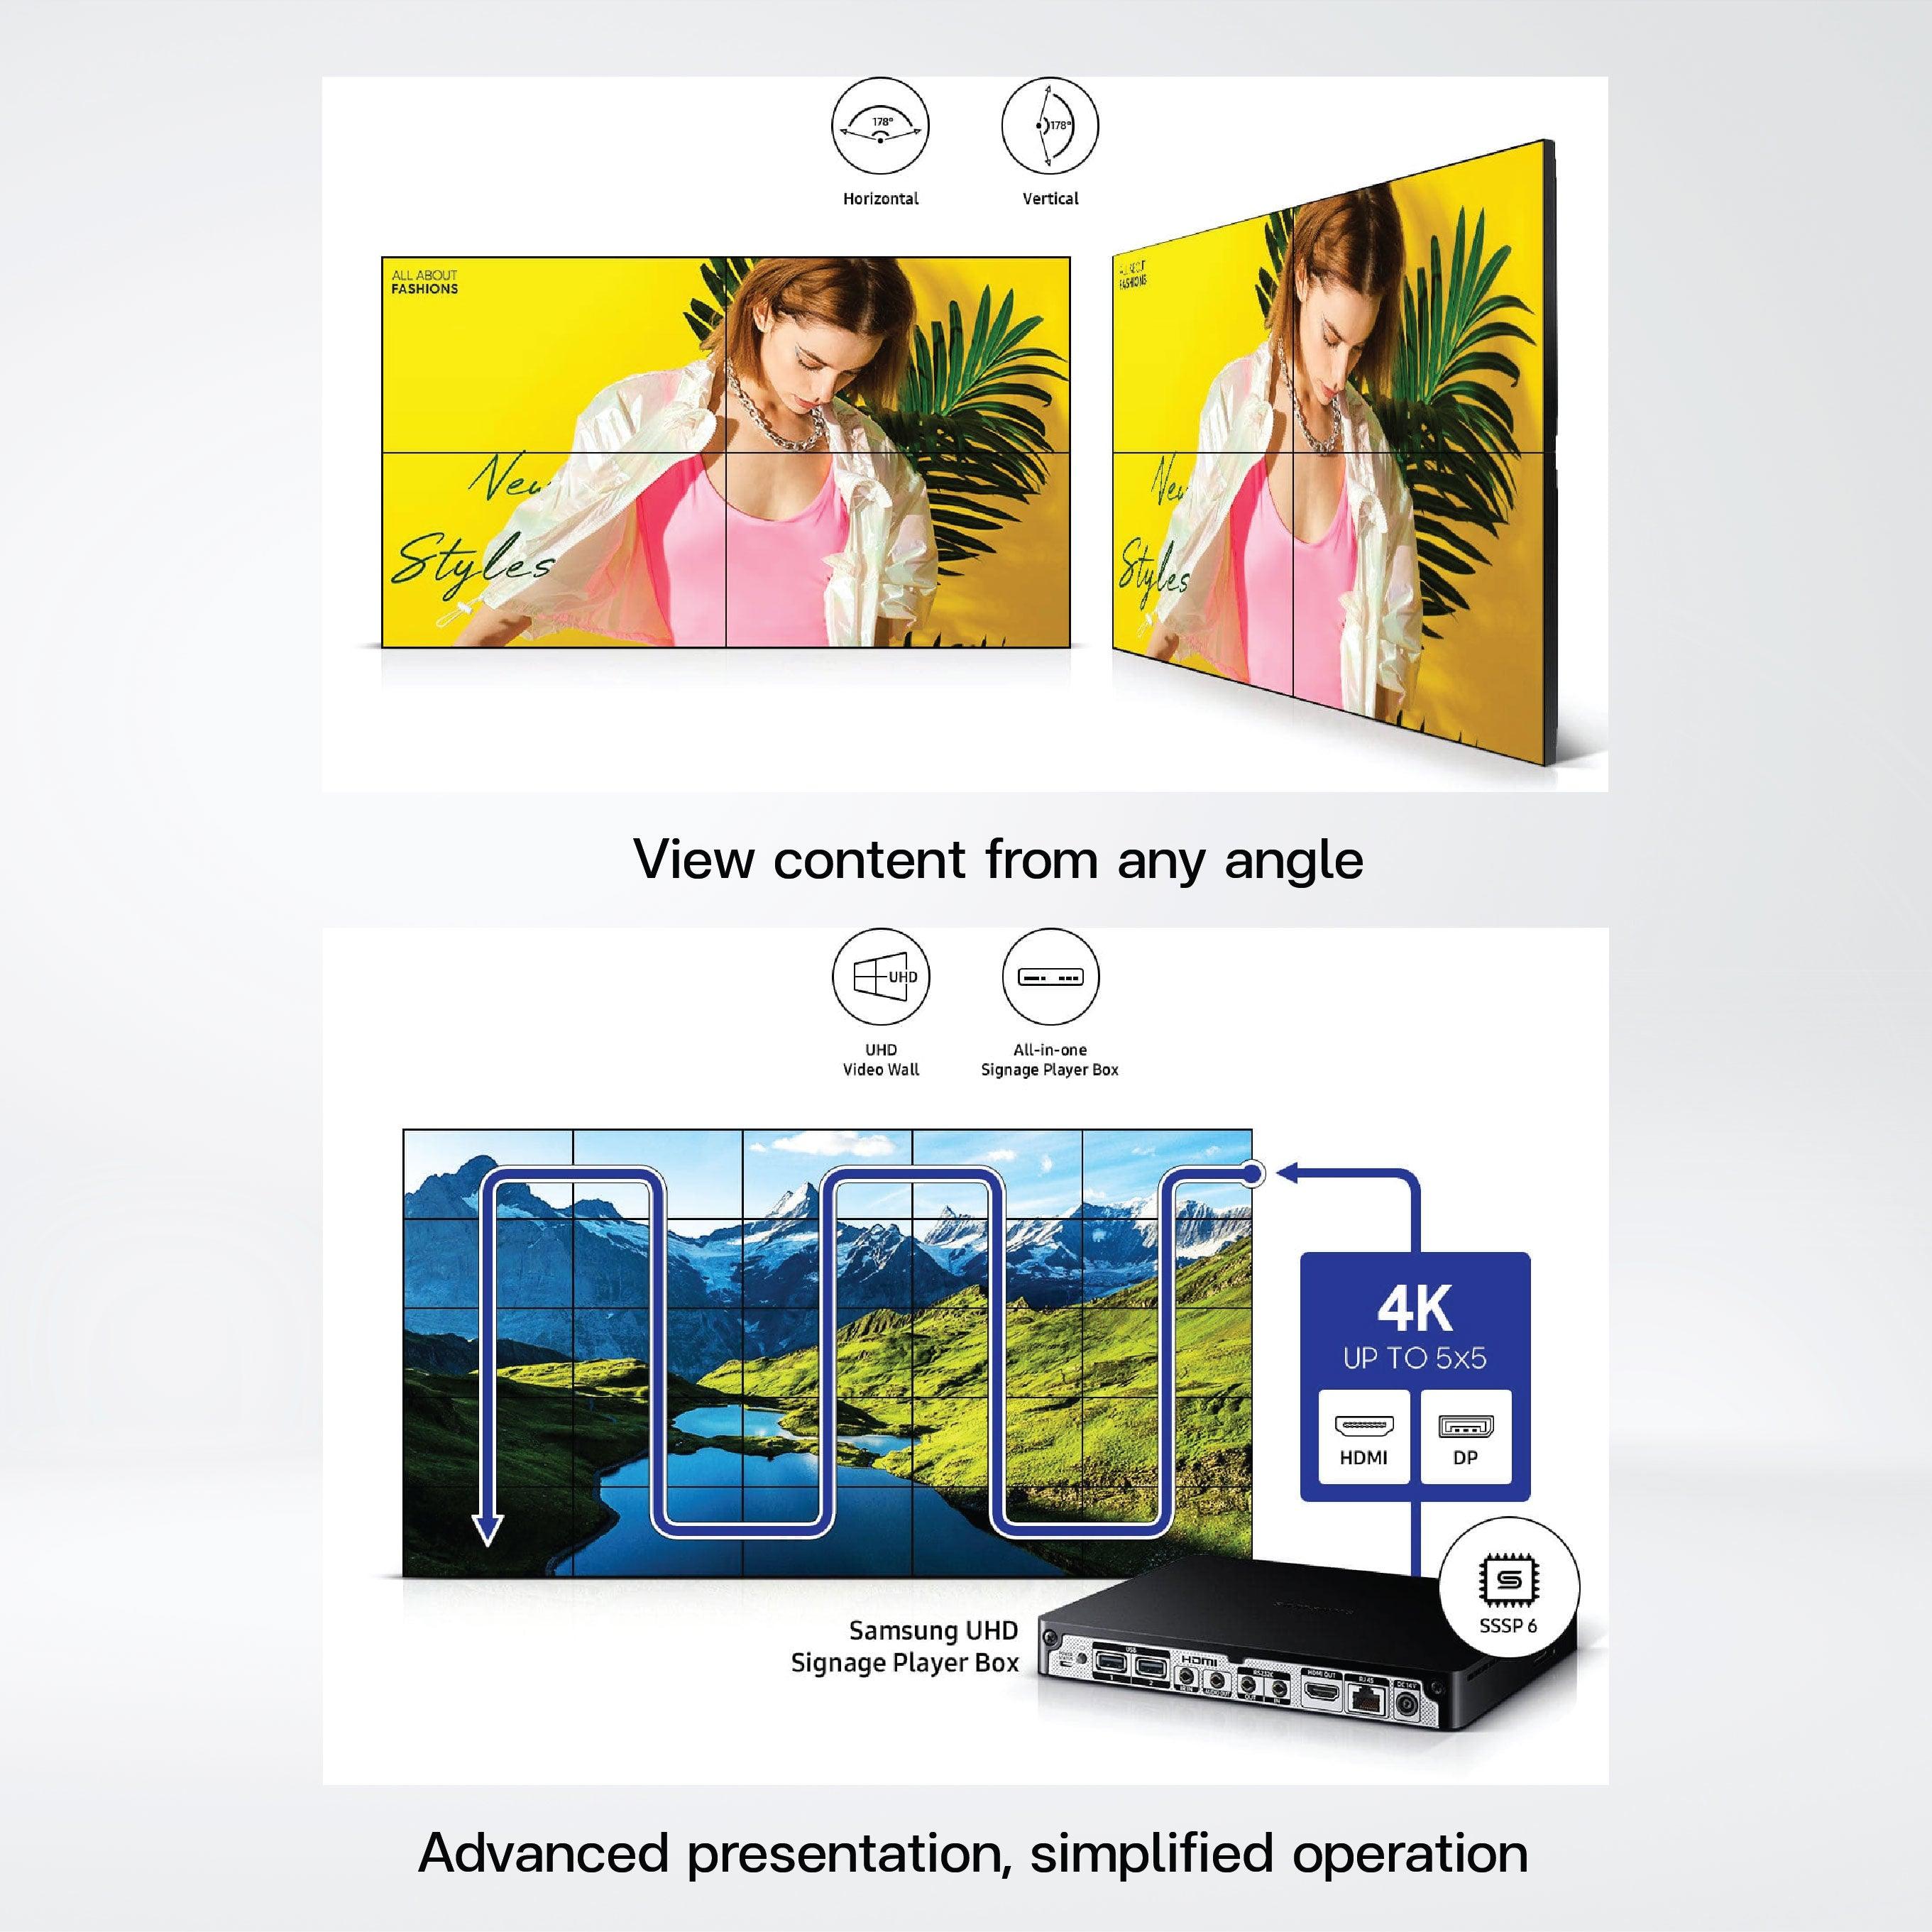 VM55B-E 55" 500 nit Always-on, space-saving solution delivering a seamless visual experience - Riverplus